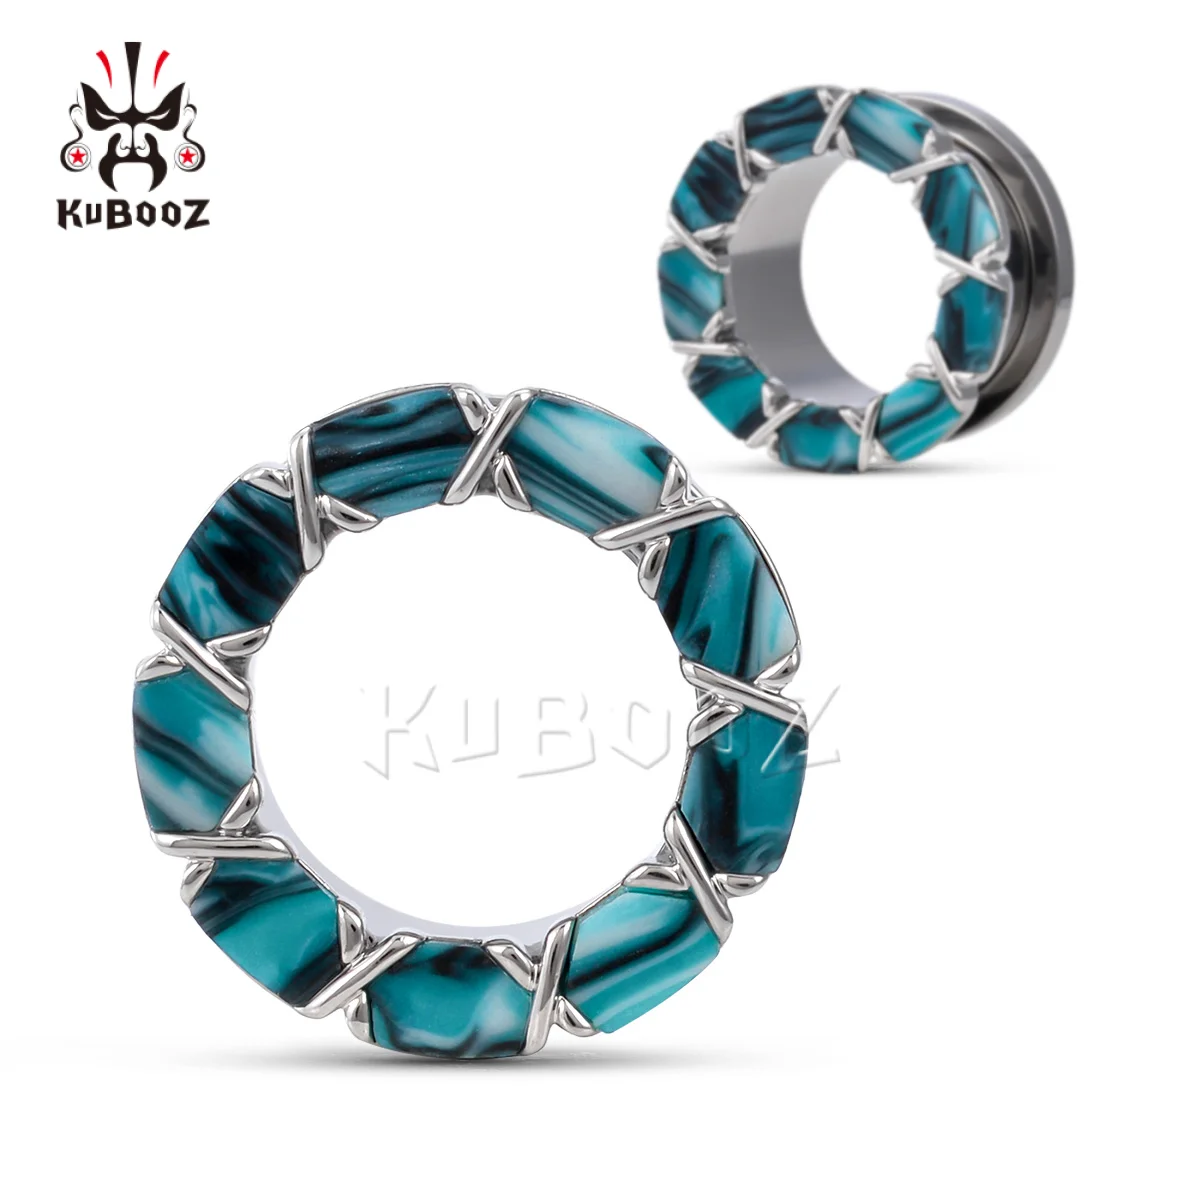 

KUBOOZ Ear Plugs Gauges Tunnels Colored Shell Expander Stretchers Piercing Jewelry Stainless Steel Earrings 2PCS